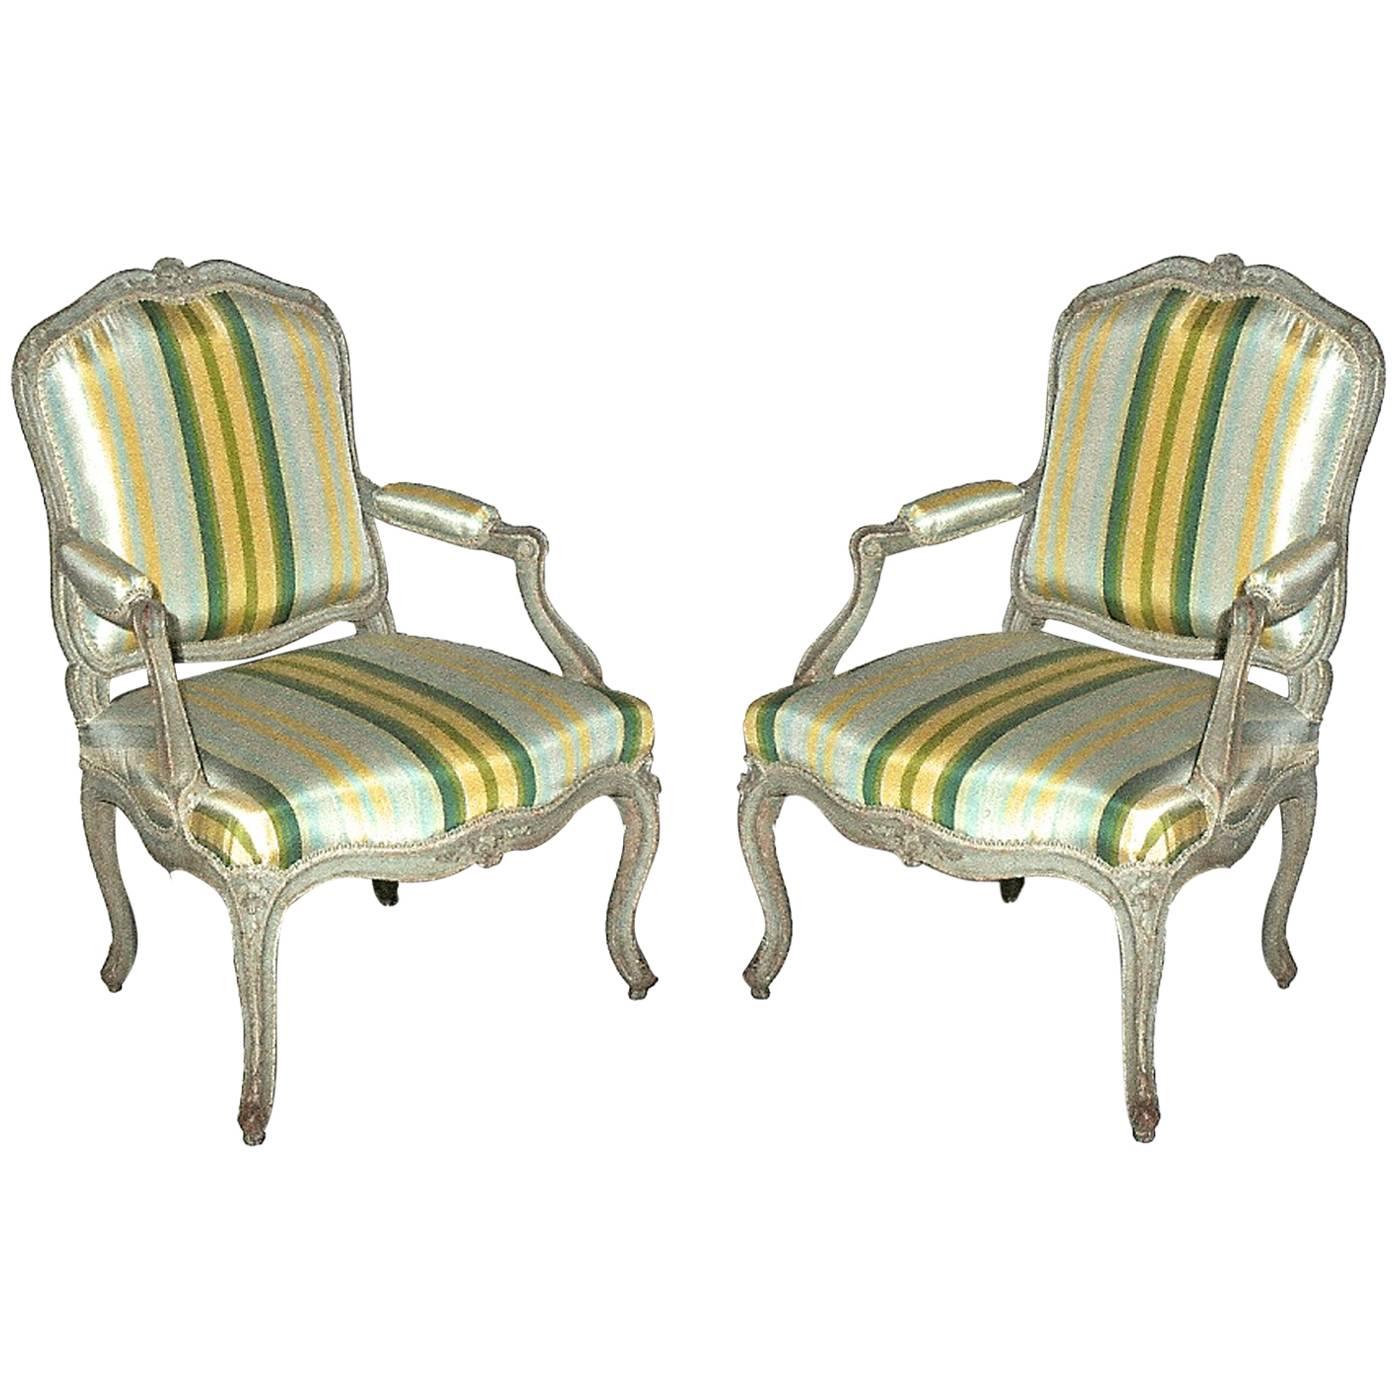 Pair of Painted French Fauteuils a La Reine, Signed “ O G Mathon, ” circa 1765